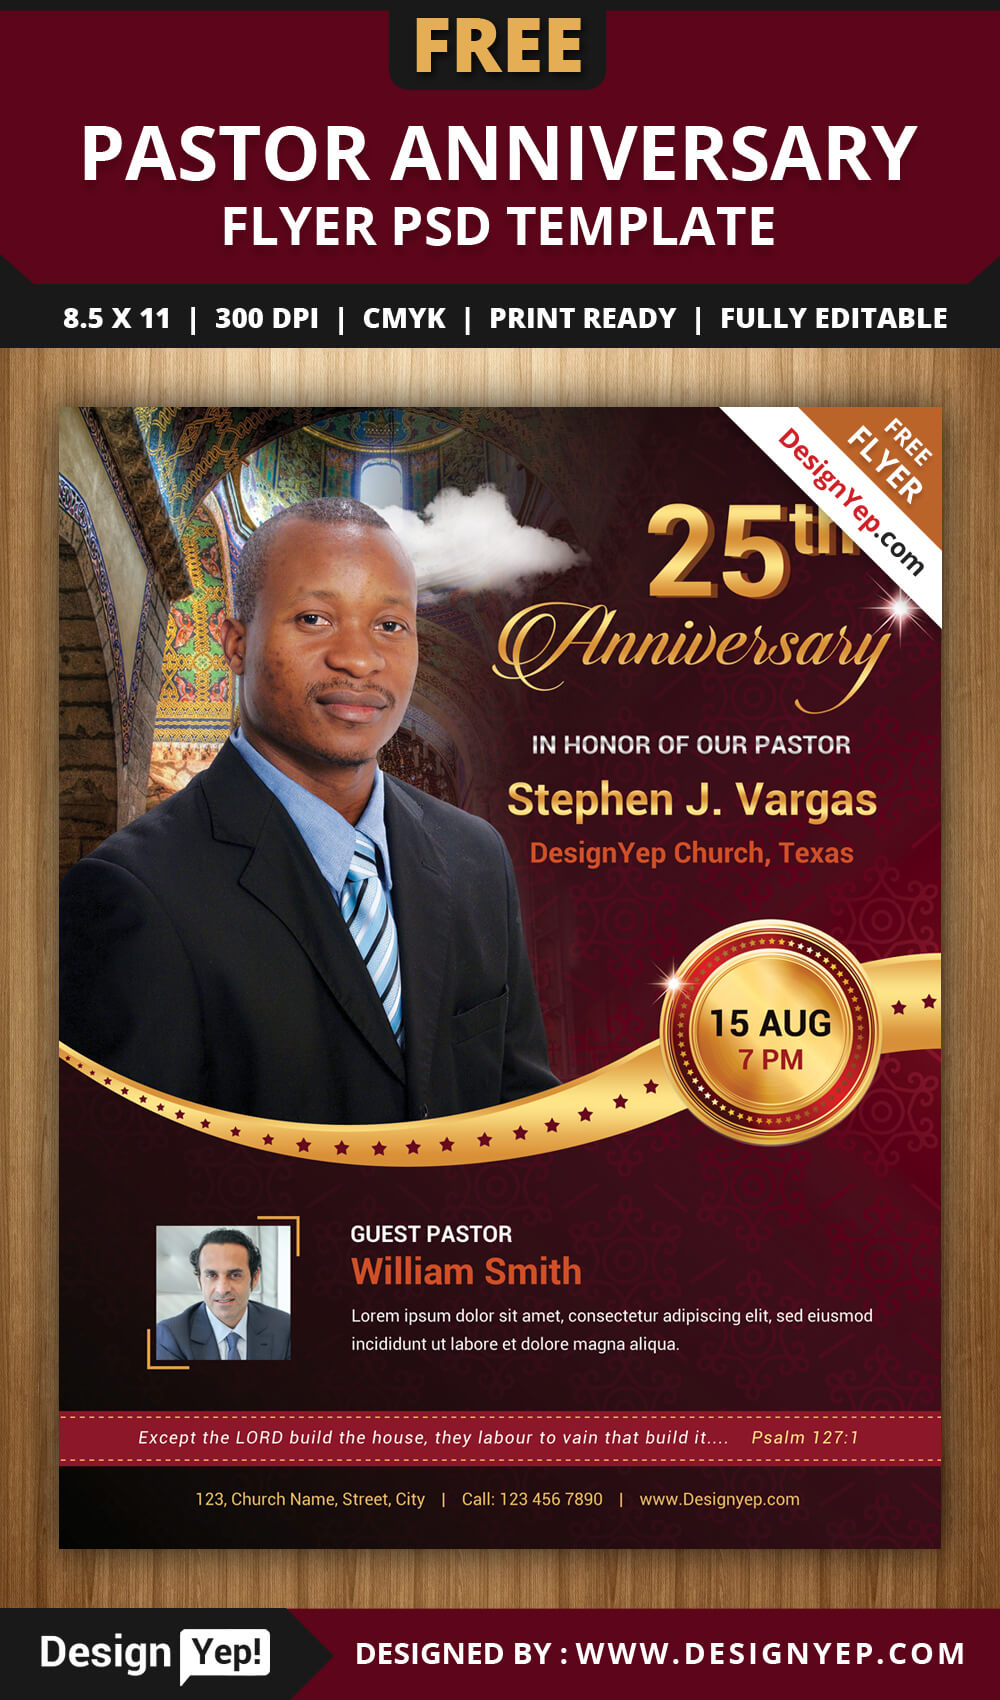 Free Pastor Anniversary Flyer Psd Template On Behance With Regard To Anniversary Flyer Template Free